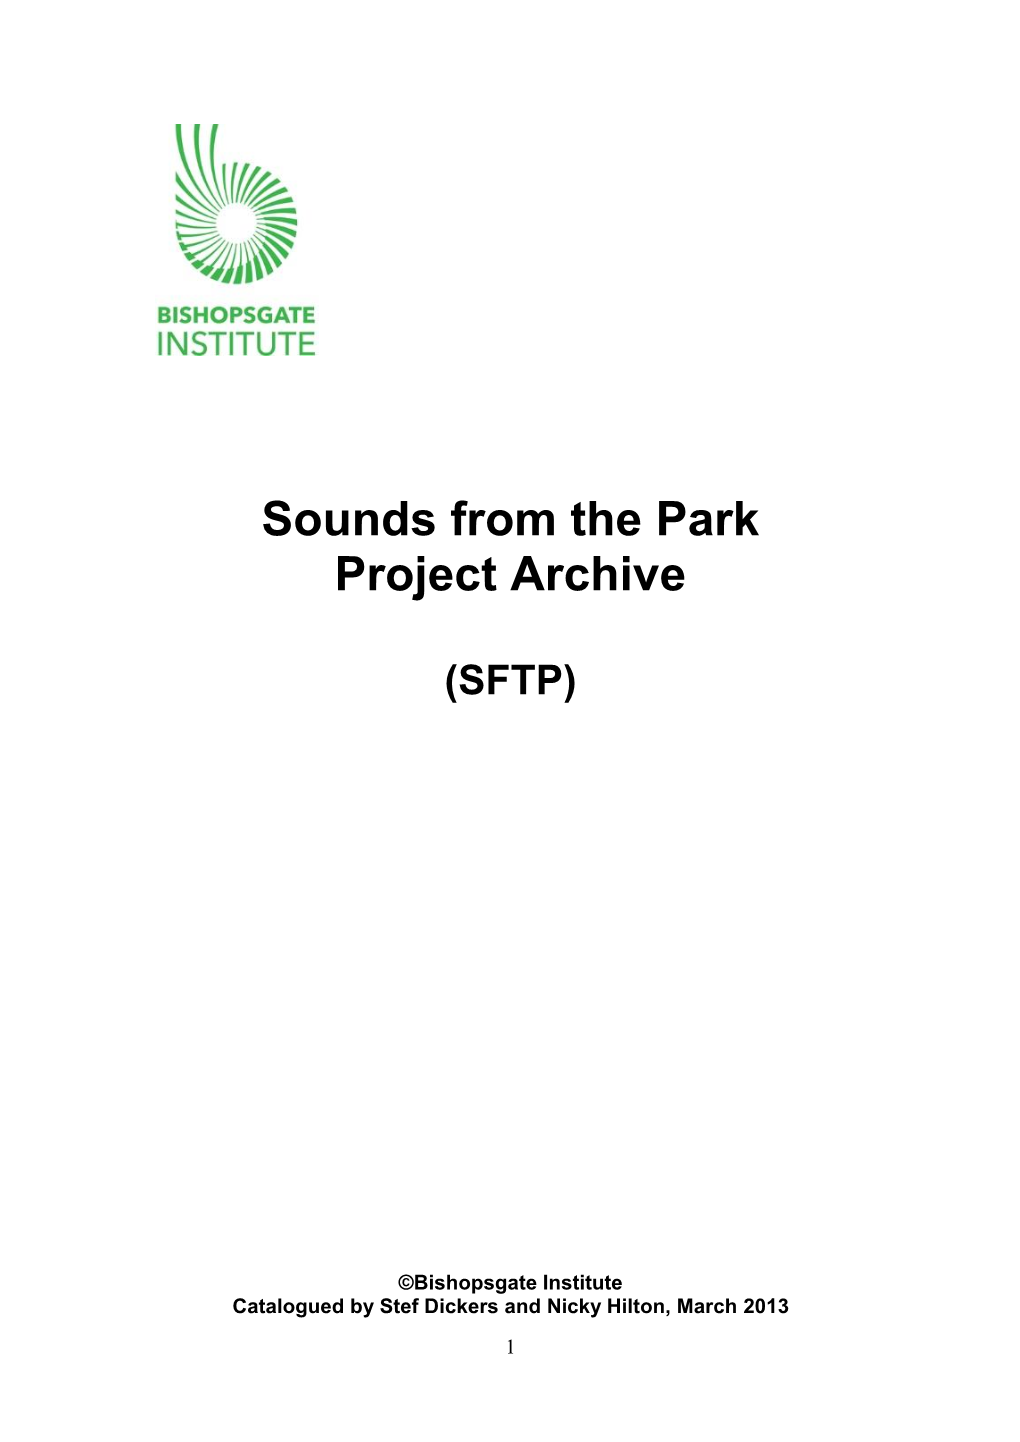 Sounds from the Park Project Archive